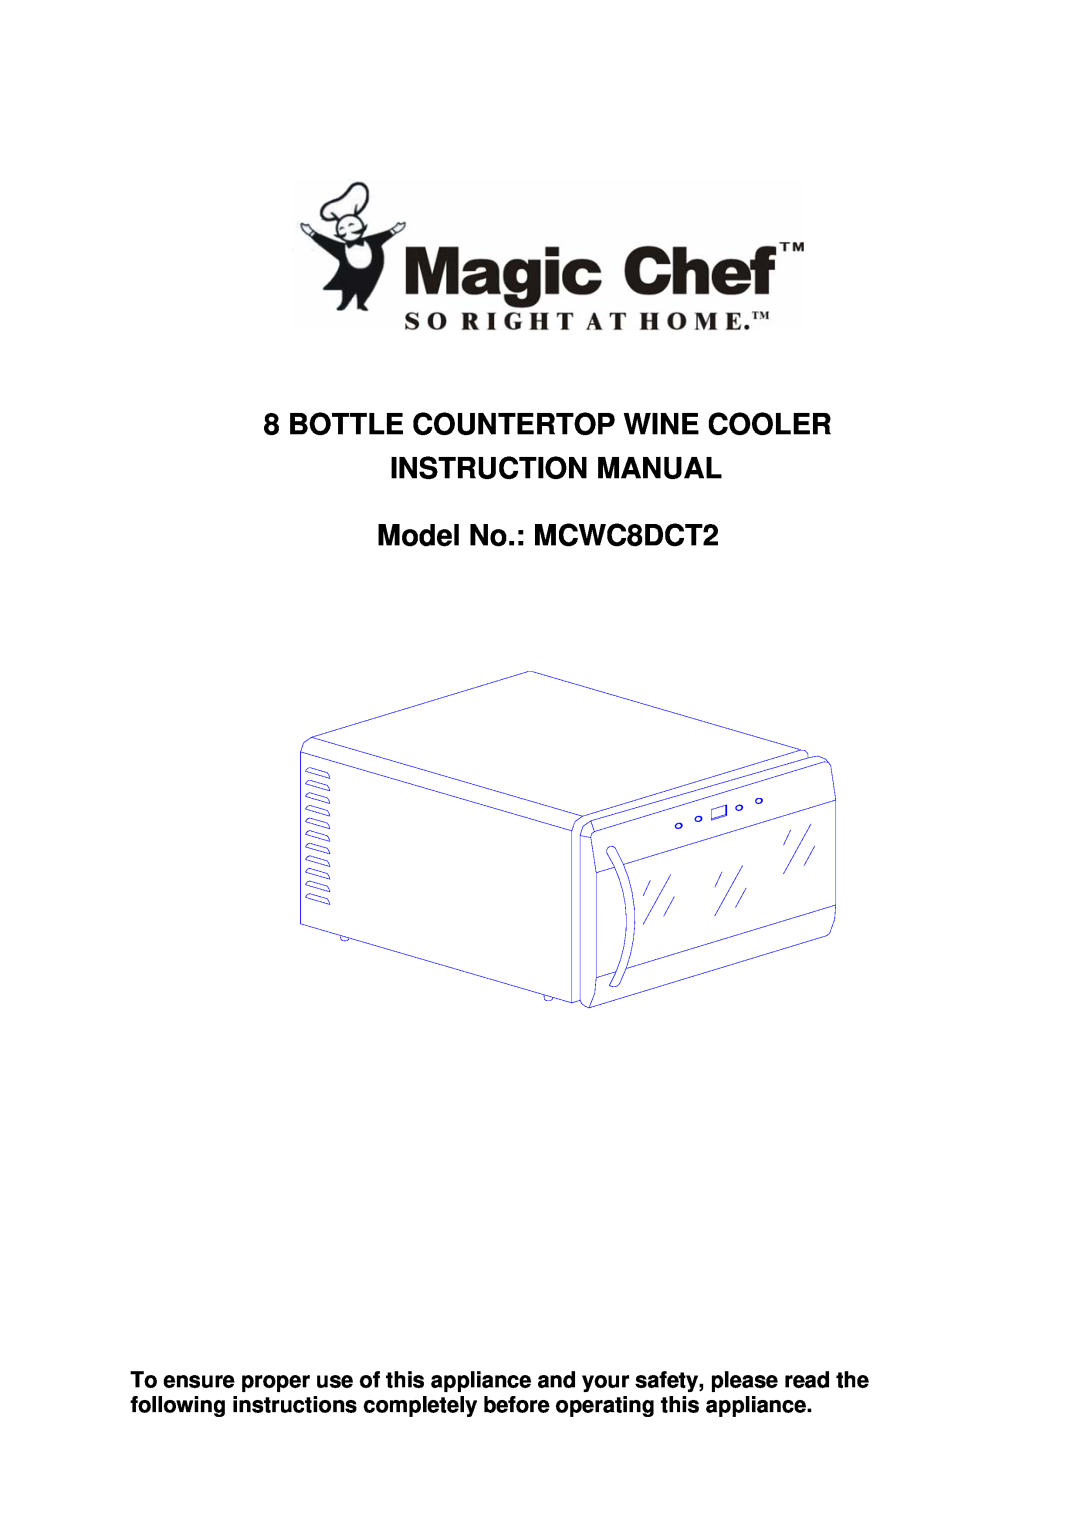 Magic Chef MCWC8DCT2 instruction manual Bottle Countertop Wine Cooler 